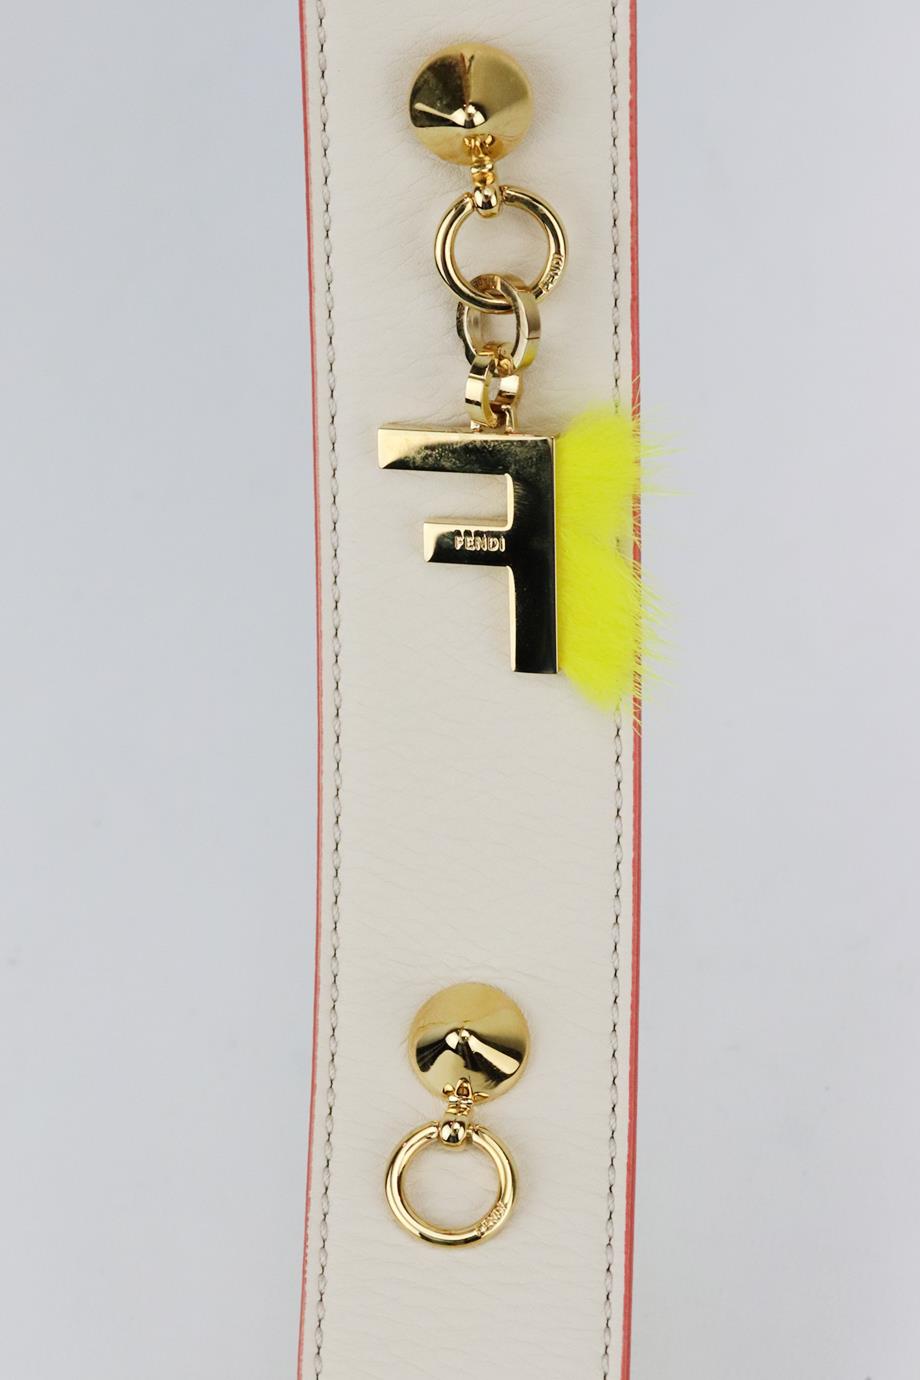 FENDI TWO TONE LEATHER BAG STRAP WITH CHARM